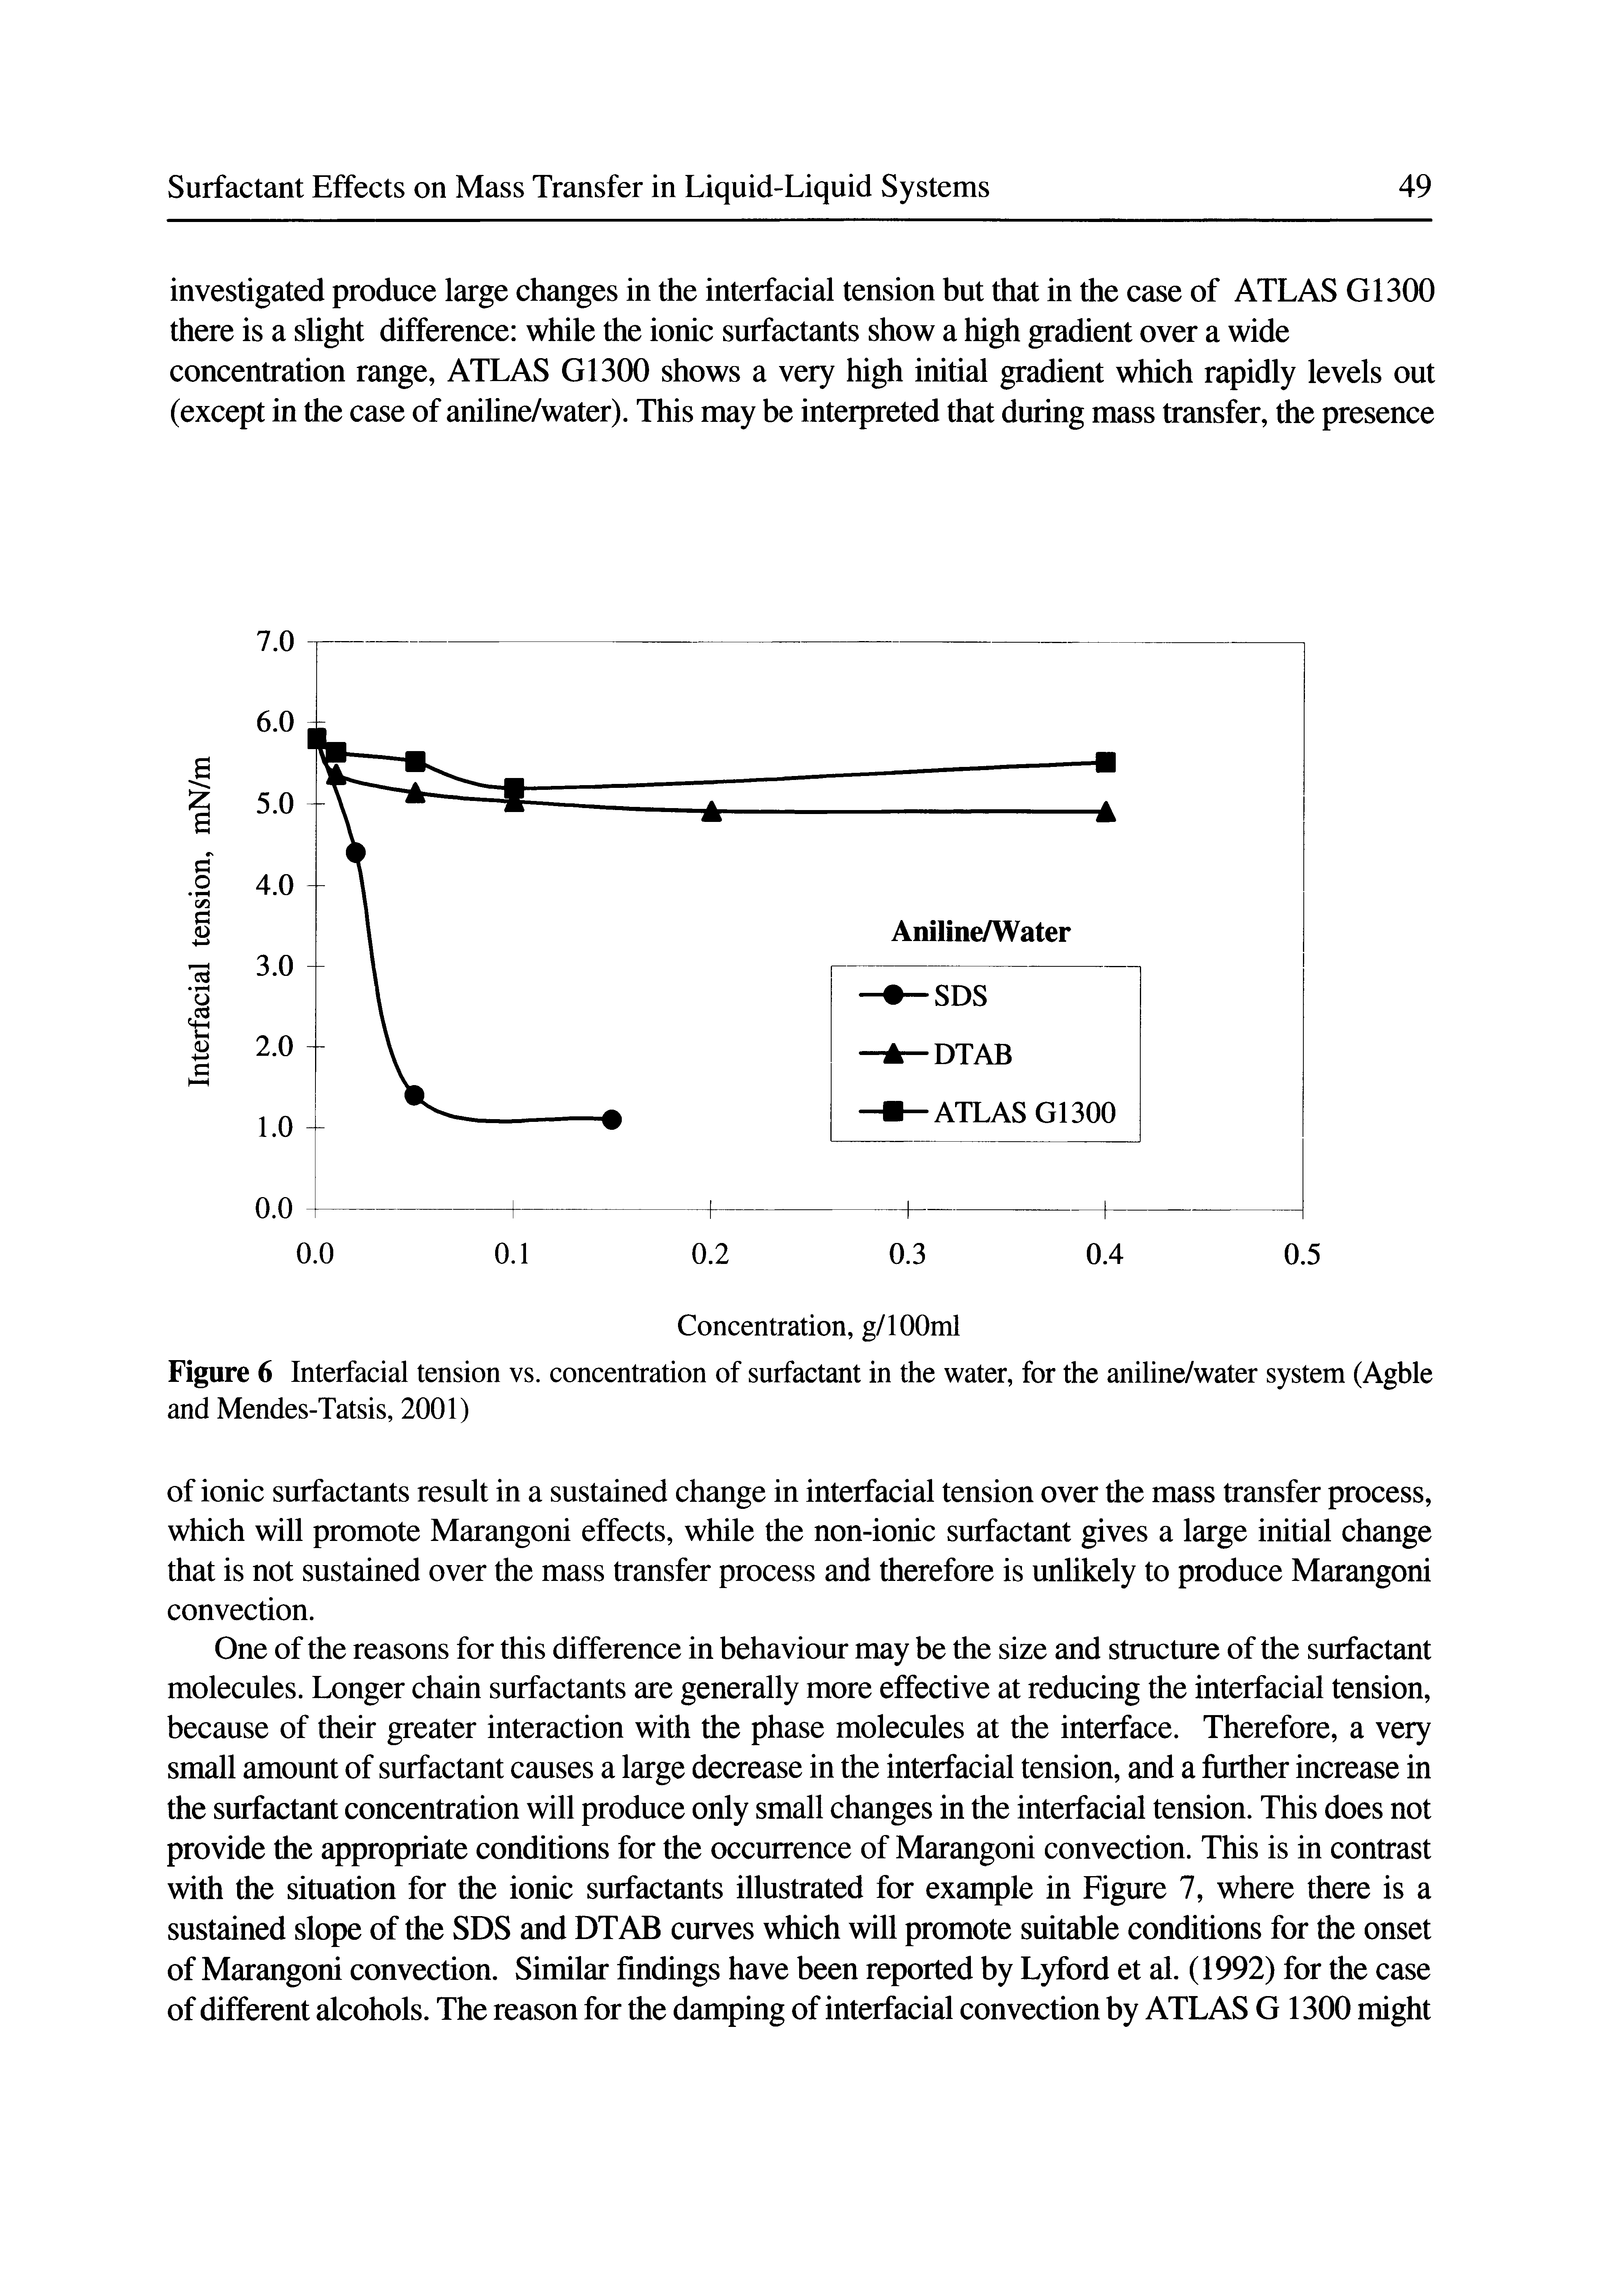 Figure 6 Interfacial tension vs. concentration of surfactant in the water, for the aniline/water system (Agble and Mendes-Tatsis, 2001)...